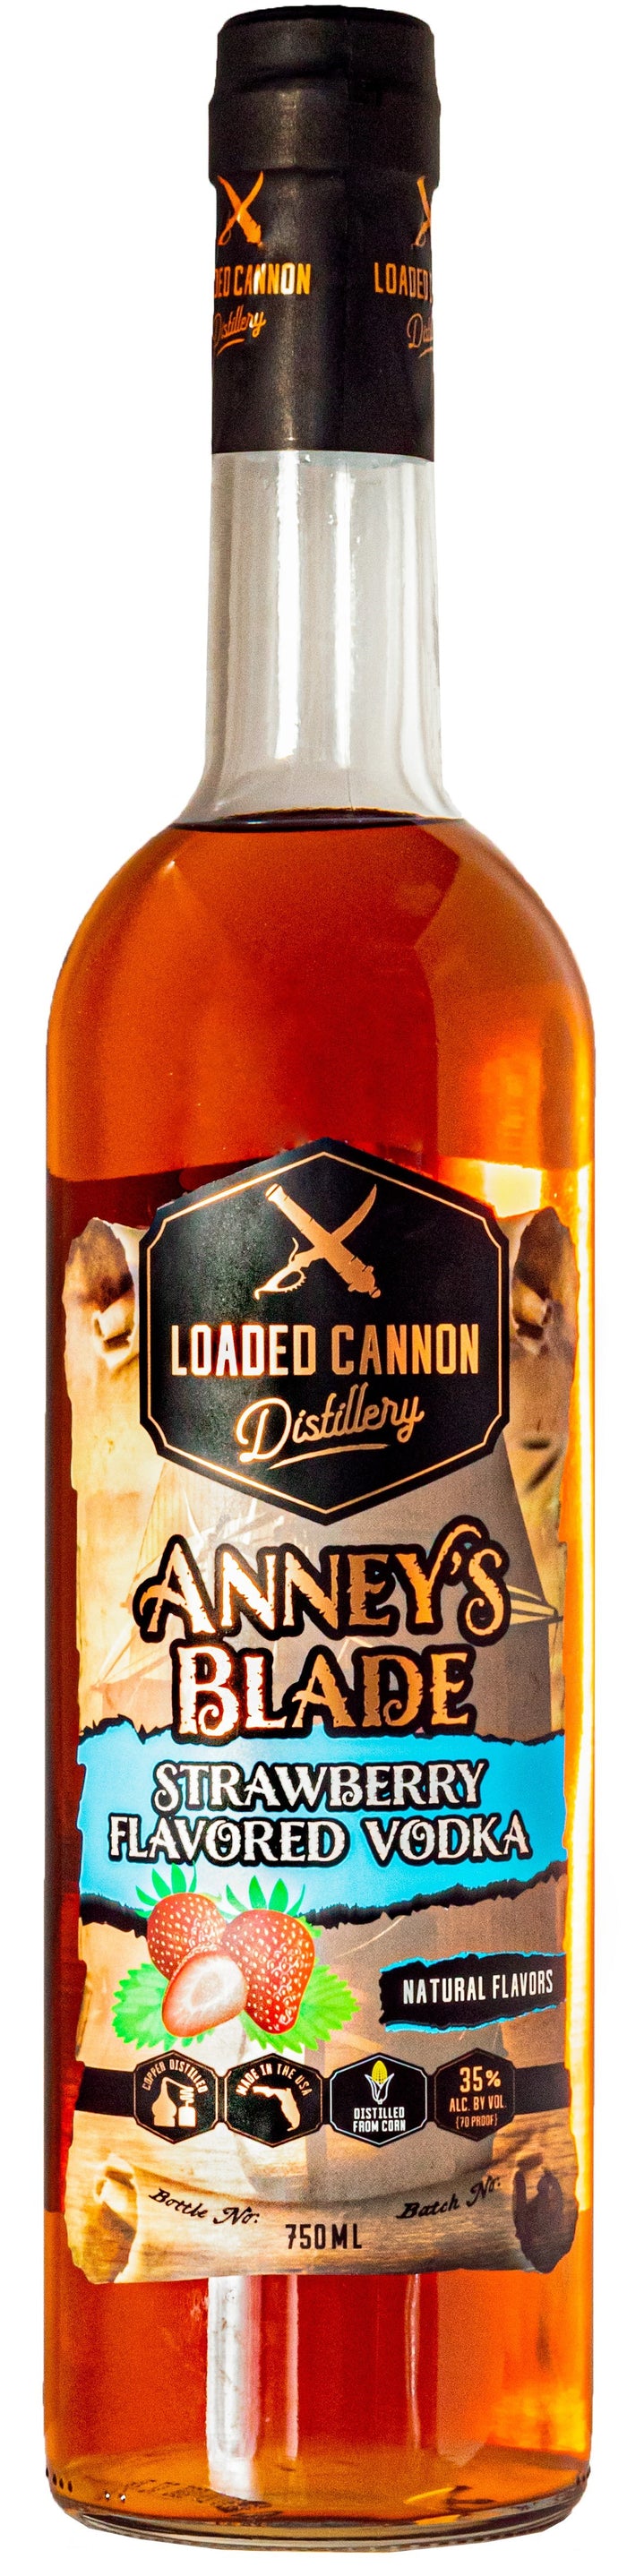 Loaded Cannon Distillery | Anney's Blade Strawberry Flavored Vodka